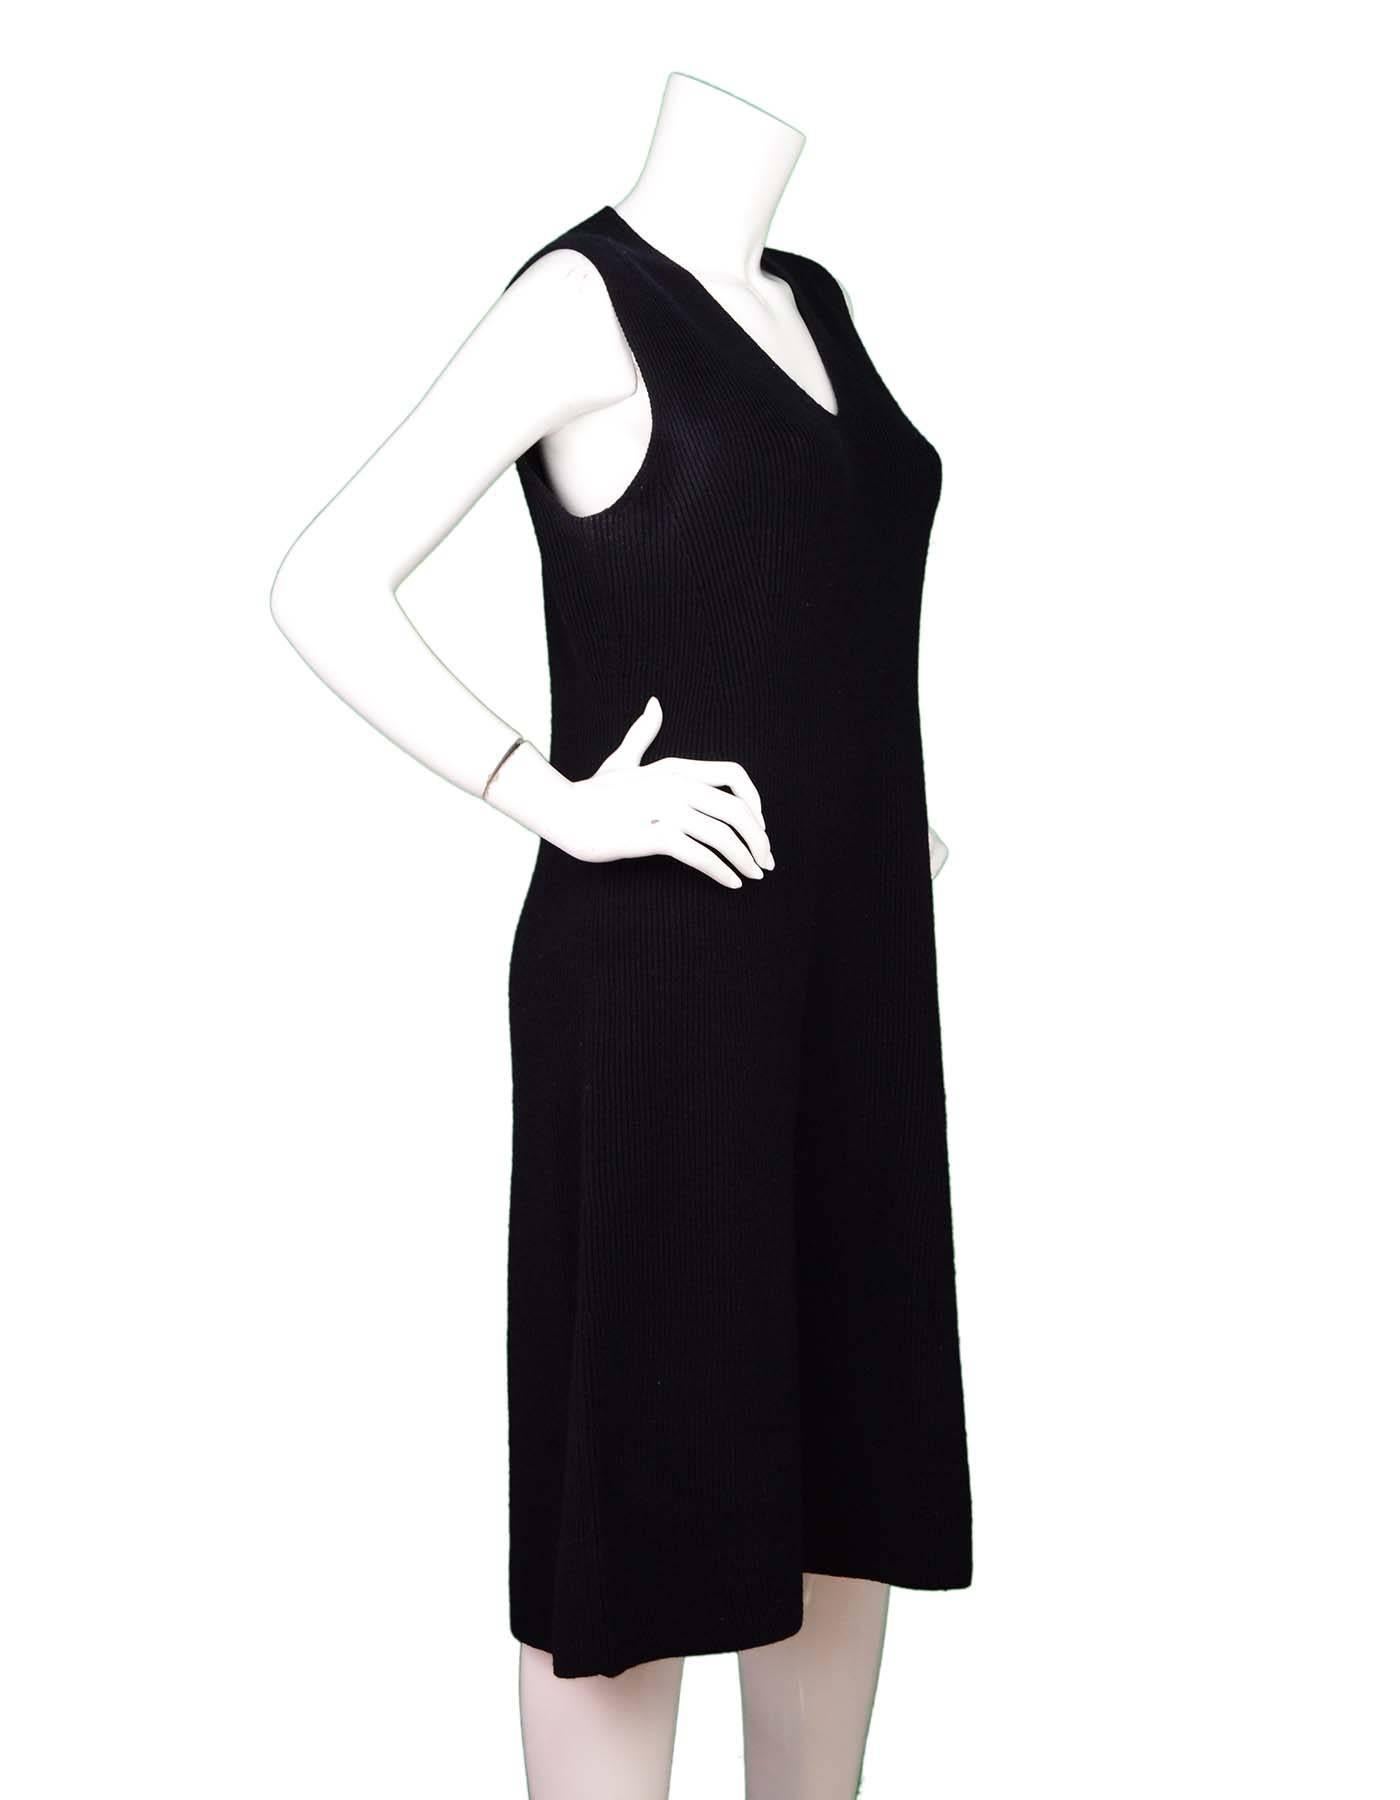 Vince Black Wool V-Neck Dress Sz L

Made In: China
Color: Black
Composition: 91% Wool, 8% Nylon, 1% Spandex
Lining: None
Closure/Opening: Pull-over
Retail Price: $375 + tax
Overall Condition: Excellent pre-owned condition with the exception